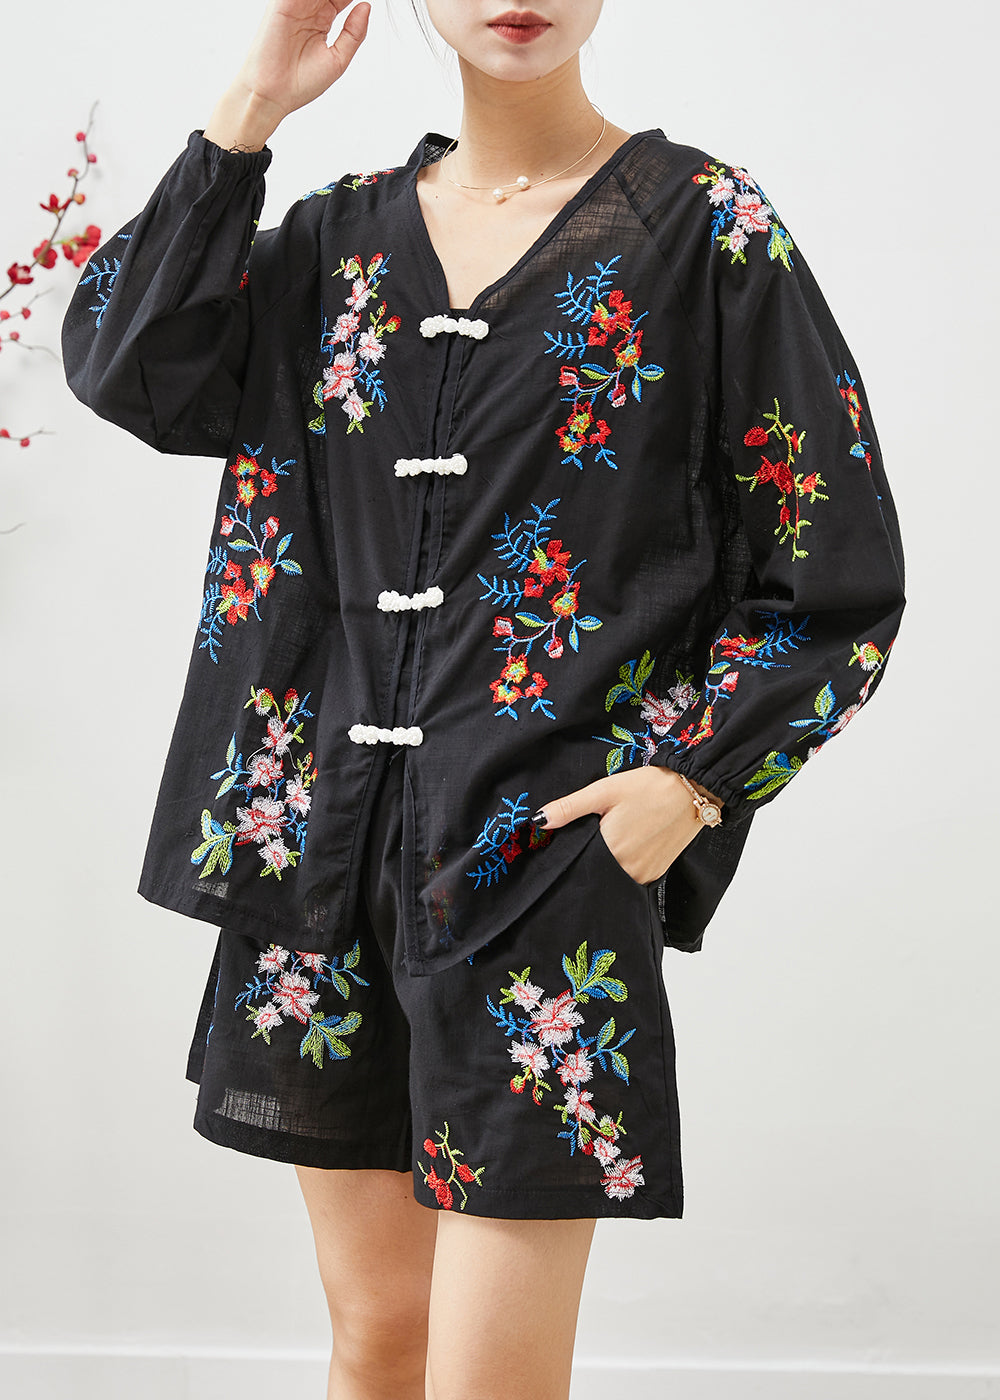 Elegant Black Embroideried Chinese Button Cotton Women Sets 2 Pieces Fall